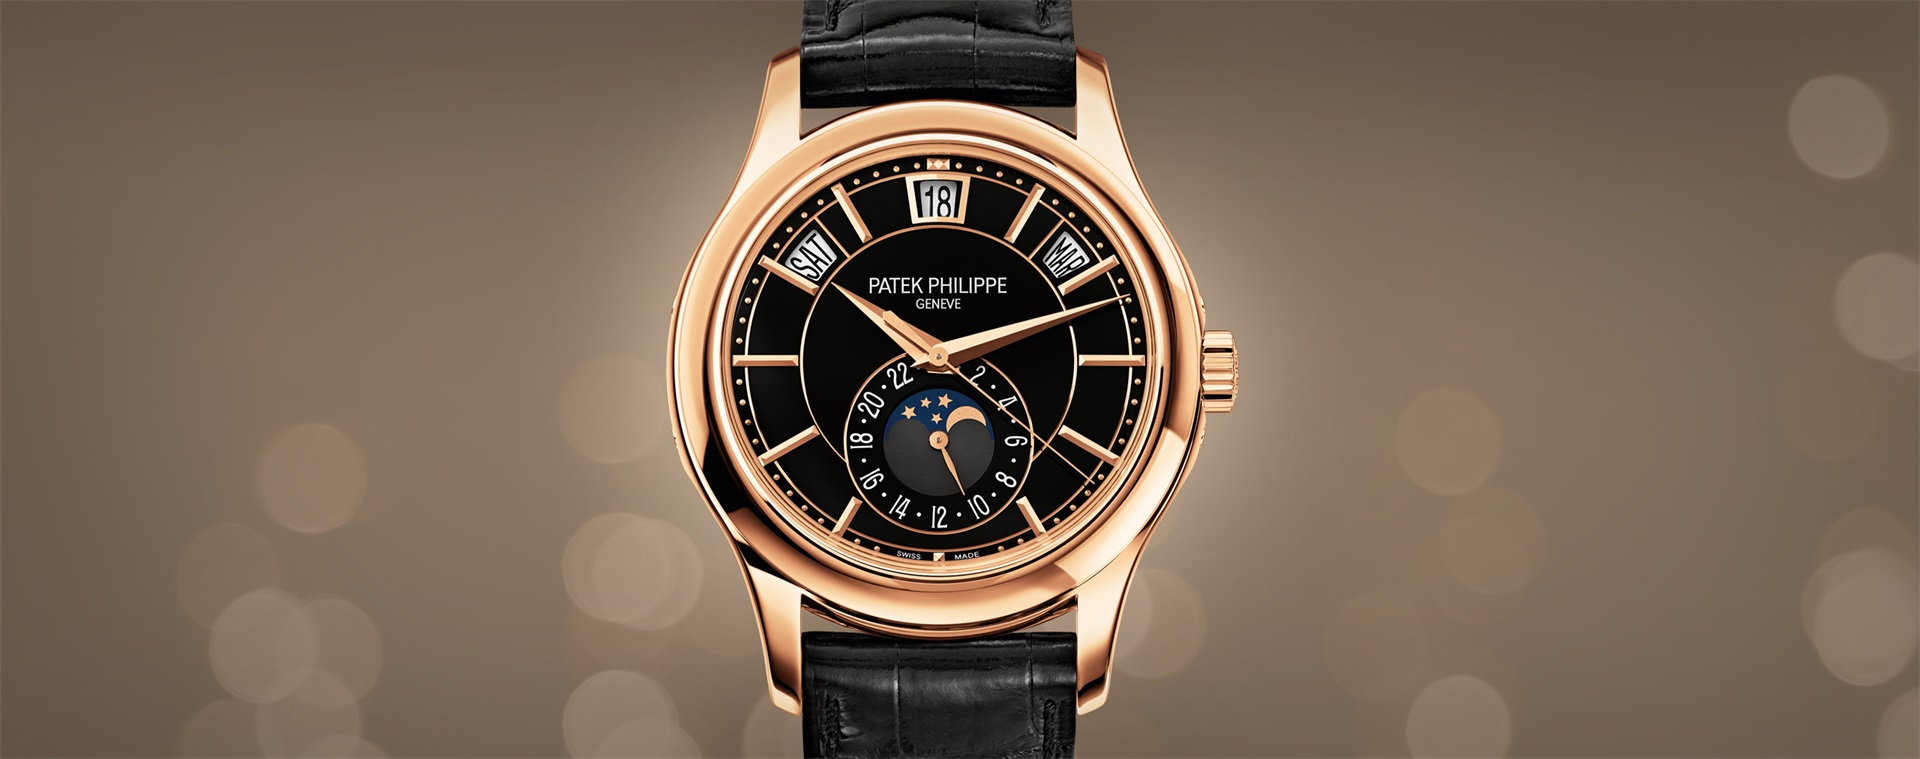 Patek Philippe Complications 7130R-013 World Time, GMT, Second Time Zone, Hour, Minute, Day/Night Indicator 18k Rose Gold Automatic Self Wind Mid-Si